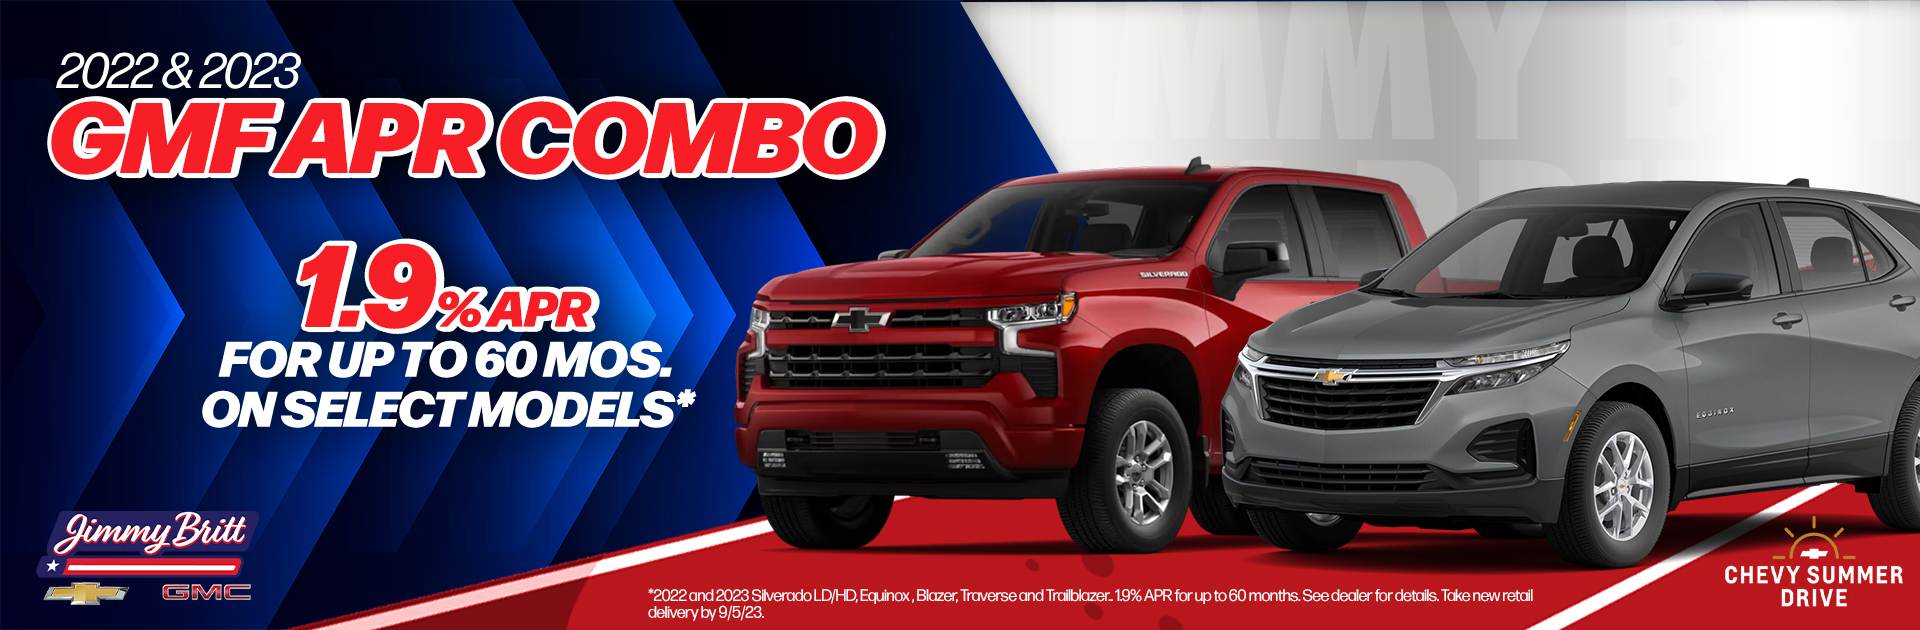 Finance for as low as 1.9% APR for 24 months on select Chevy models PLUS 90 day payment deferral